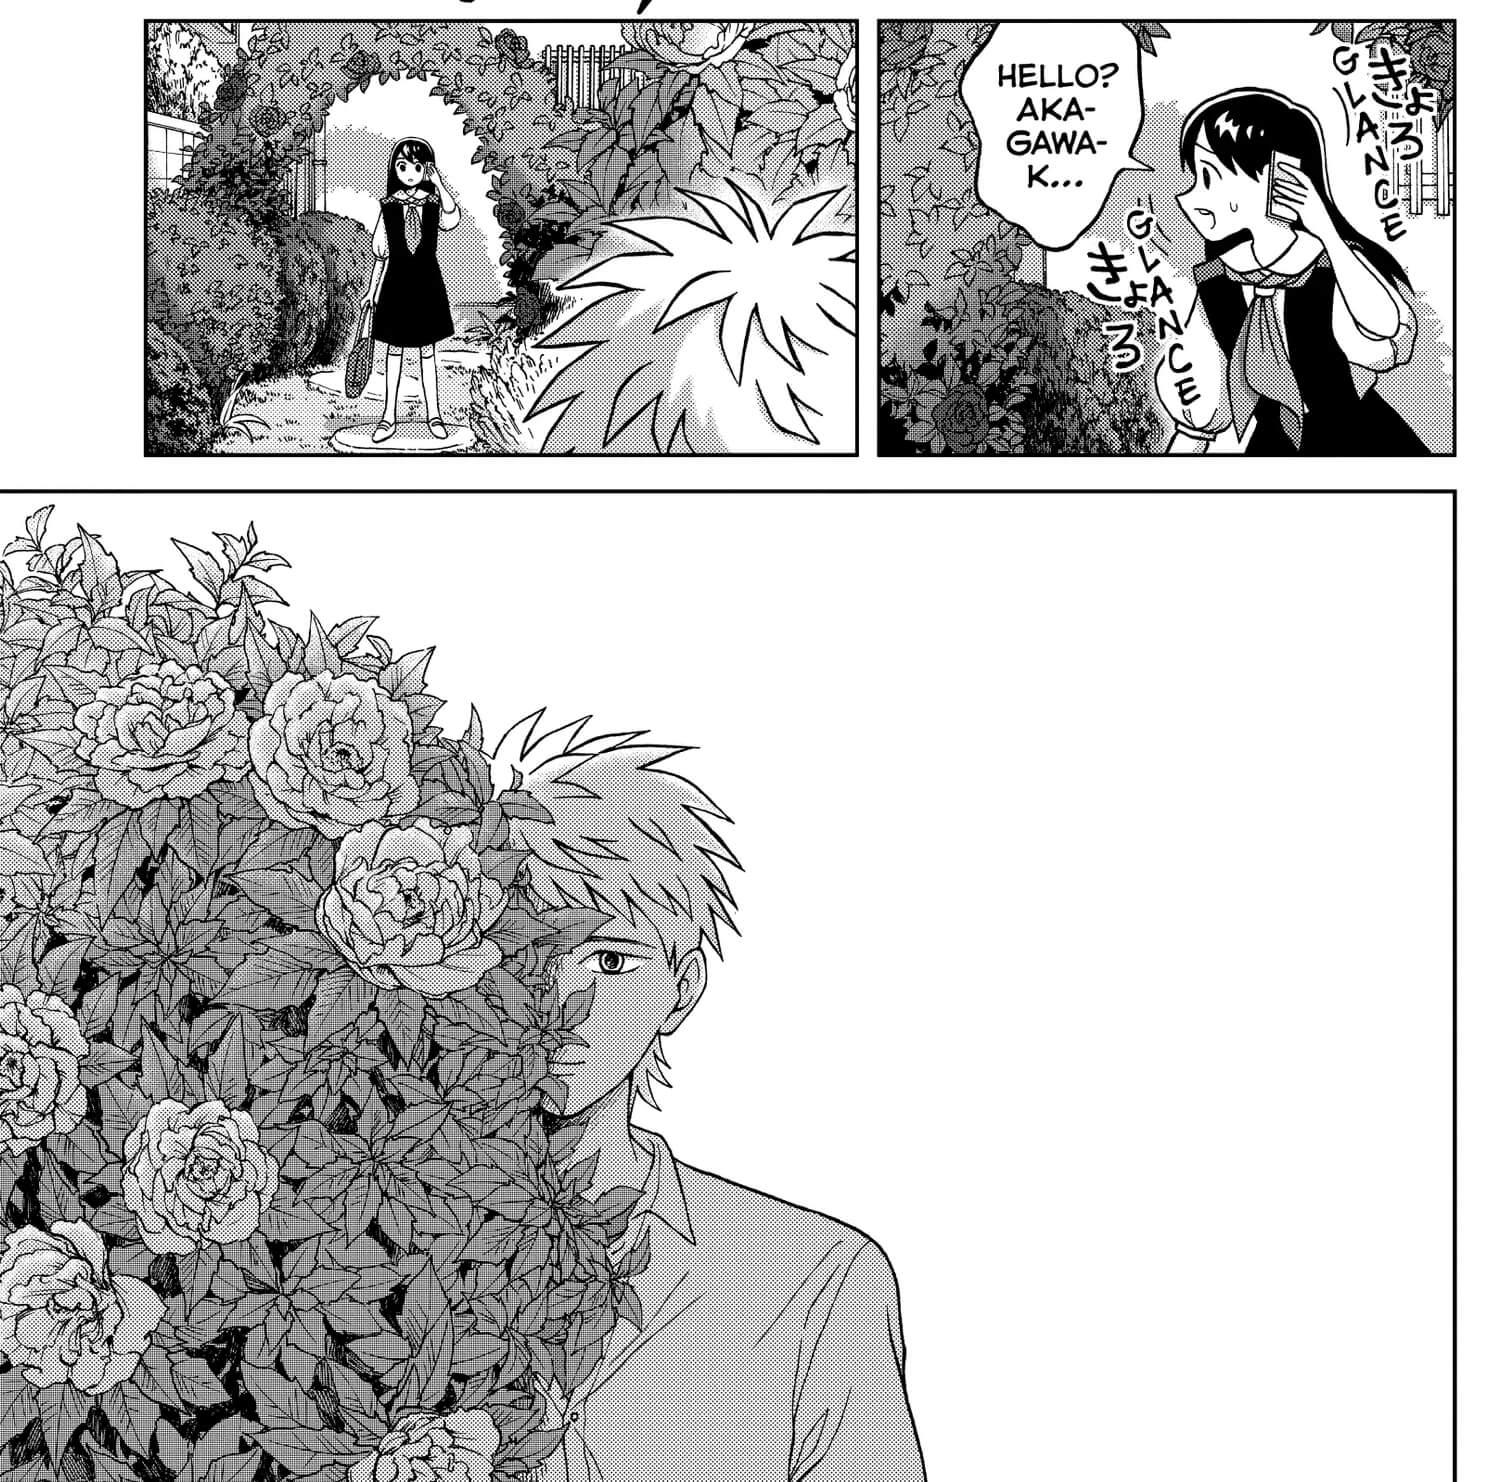 panels from Aono-Kun depicting Yuri following Aono into a garden, where he stands behind a rosebush and looks creepy.